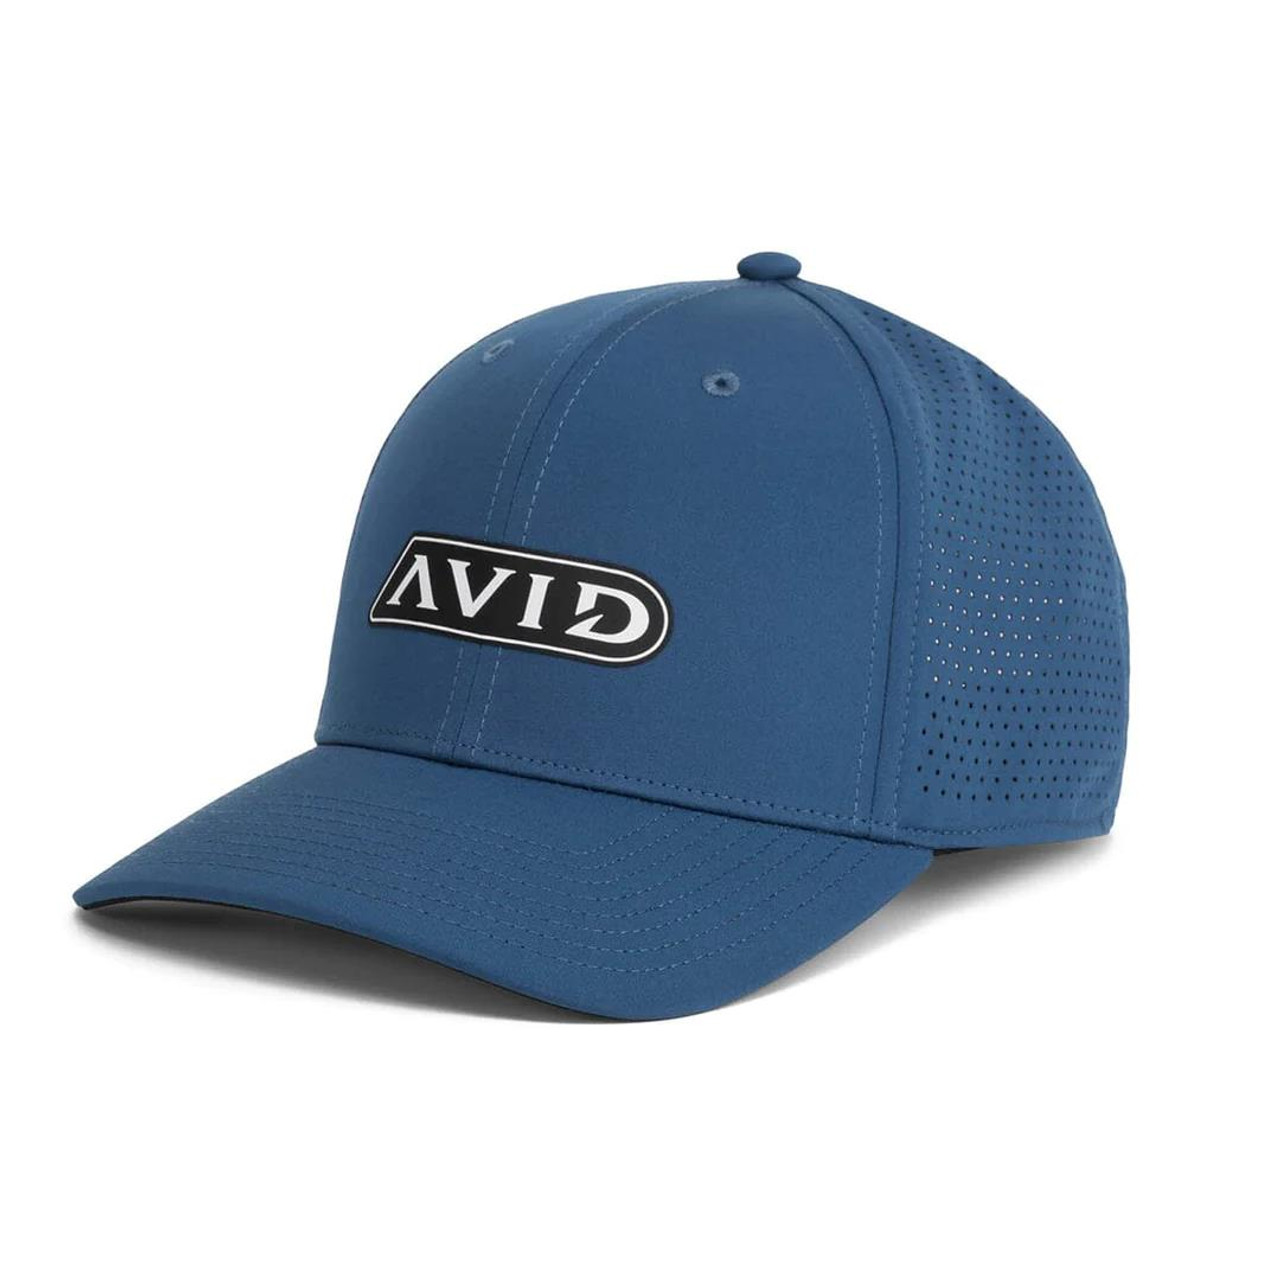 https://cdn11.bigcommerce.com/s-0xmhwue6/images/stencil/1280x1280/products/31011/74574/Avid-Apex-Performance-Hat-Heather-Abyss-810131143985_image1__43748.1711999413.jpg?c=2